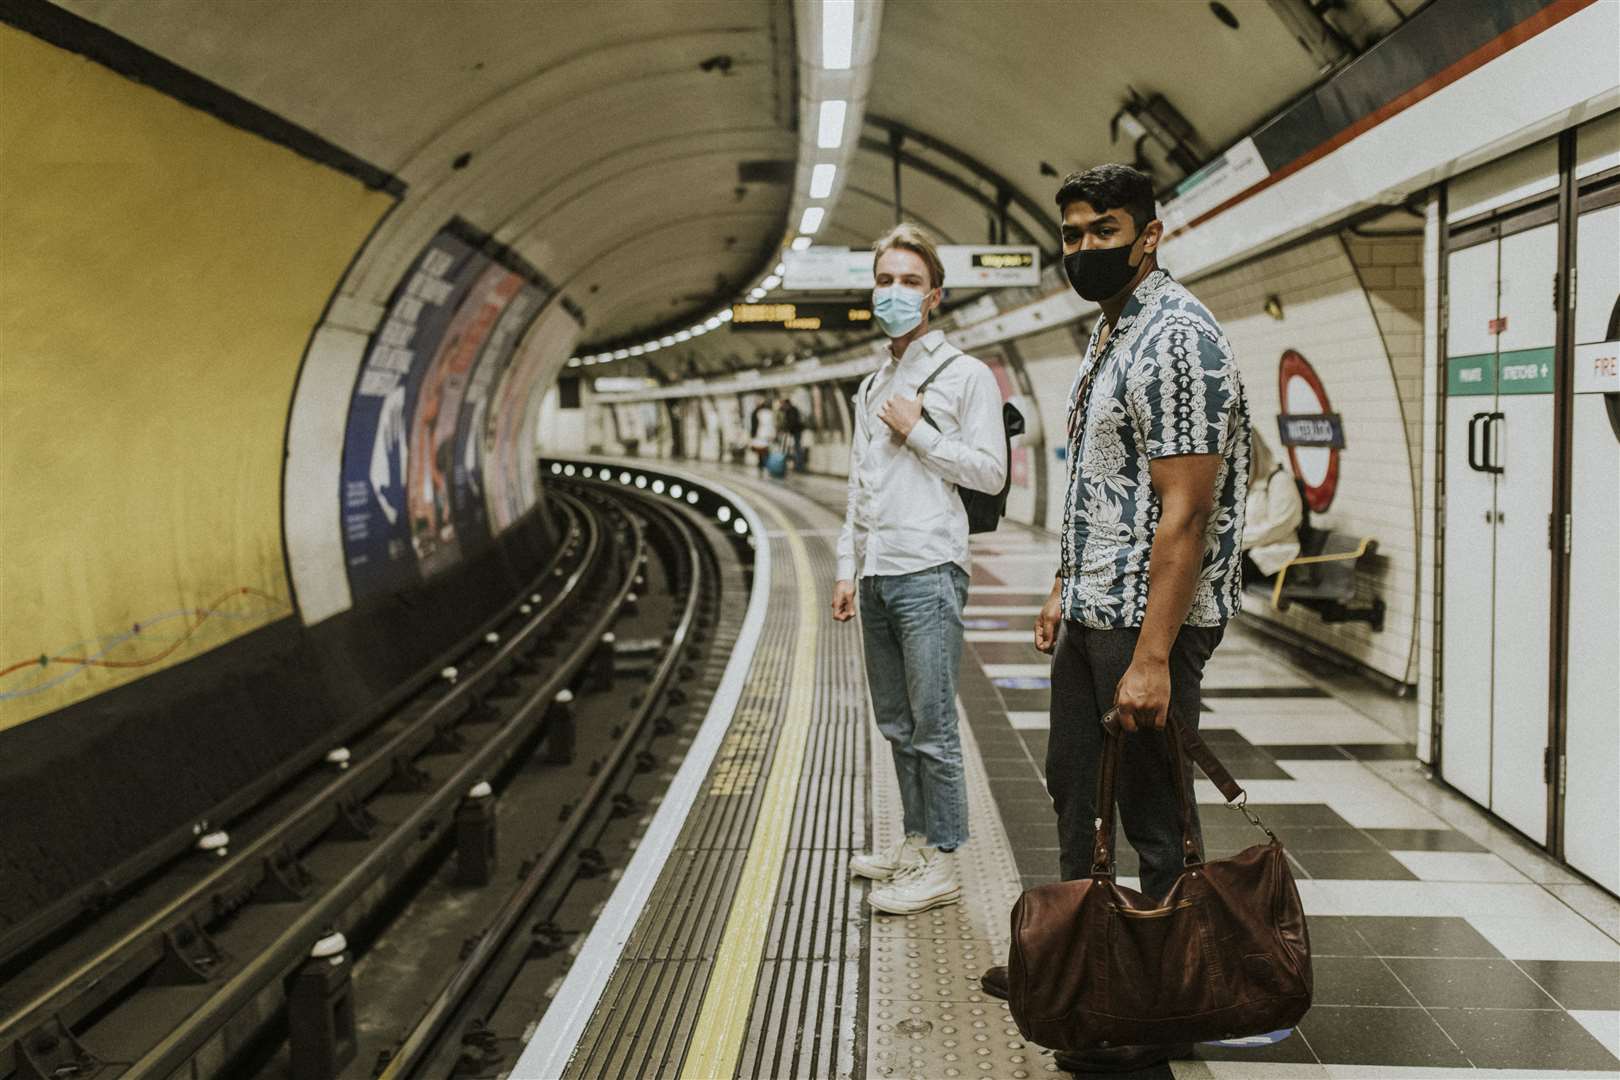 TfL said this week numbers on the tube are now above two-thirds of pre-pandemic levels and rising